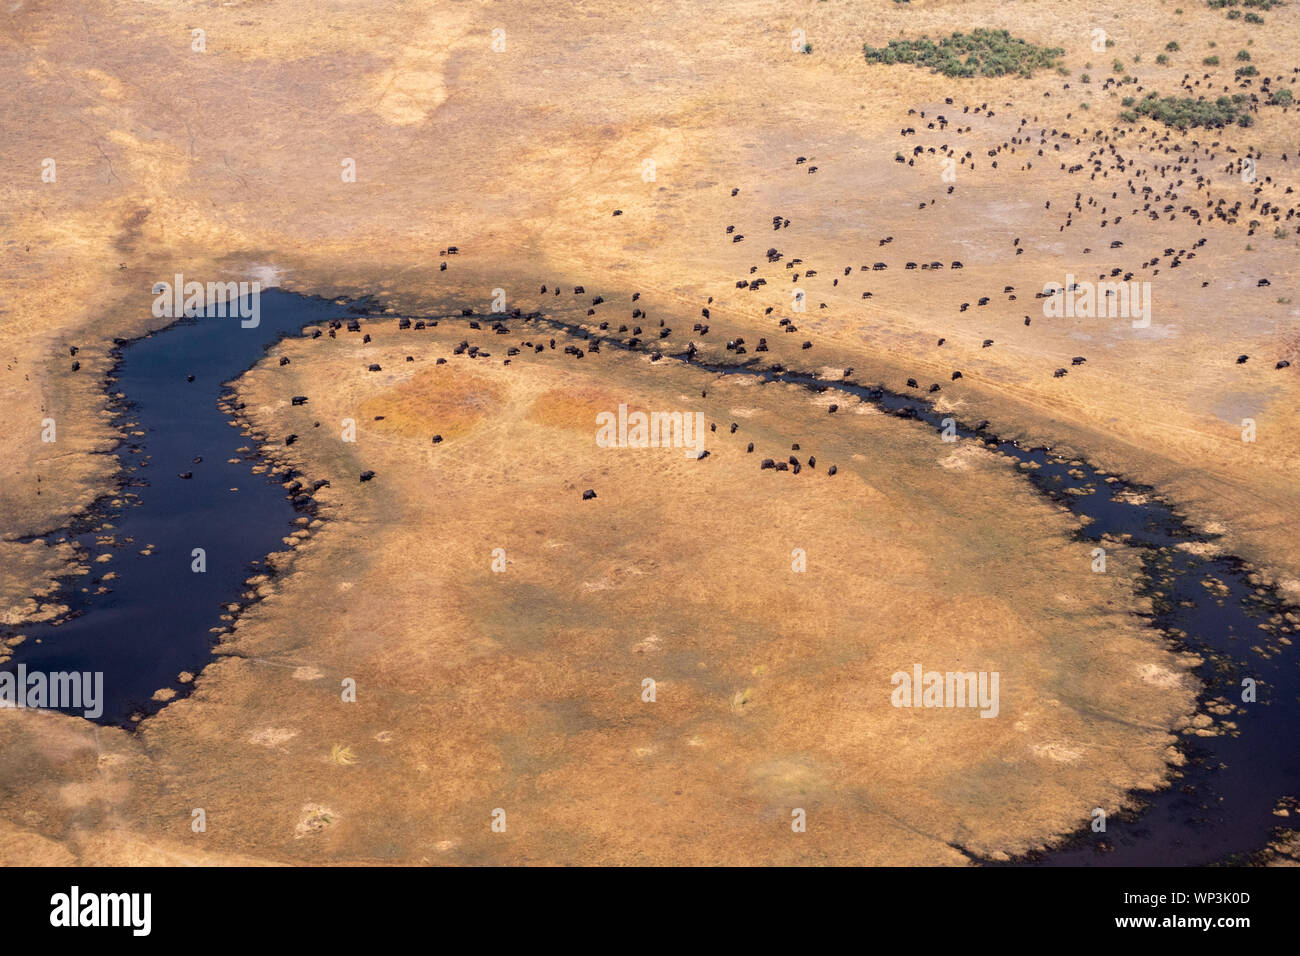 Aerial of Buffalo Herd on a Dry, Yellow Plain with Dark Blue River in Moremi Game REserve, Okvango Delta,  Botswana Stock Photo